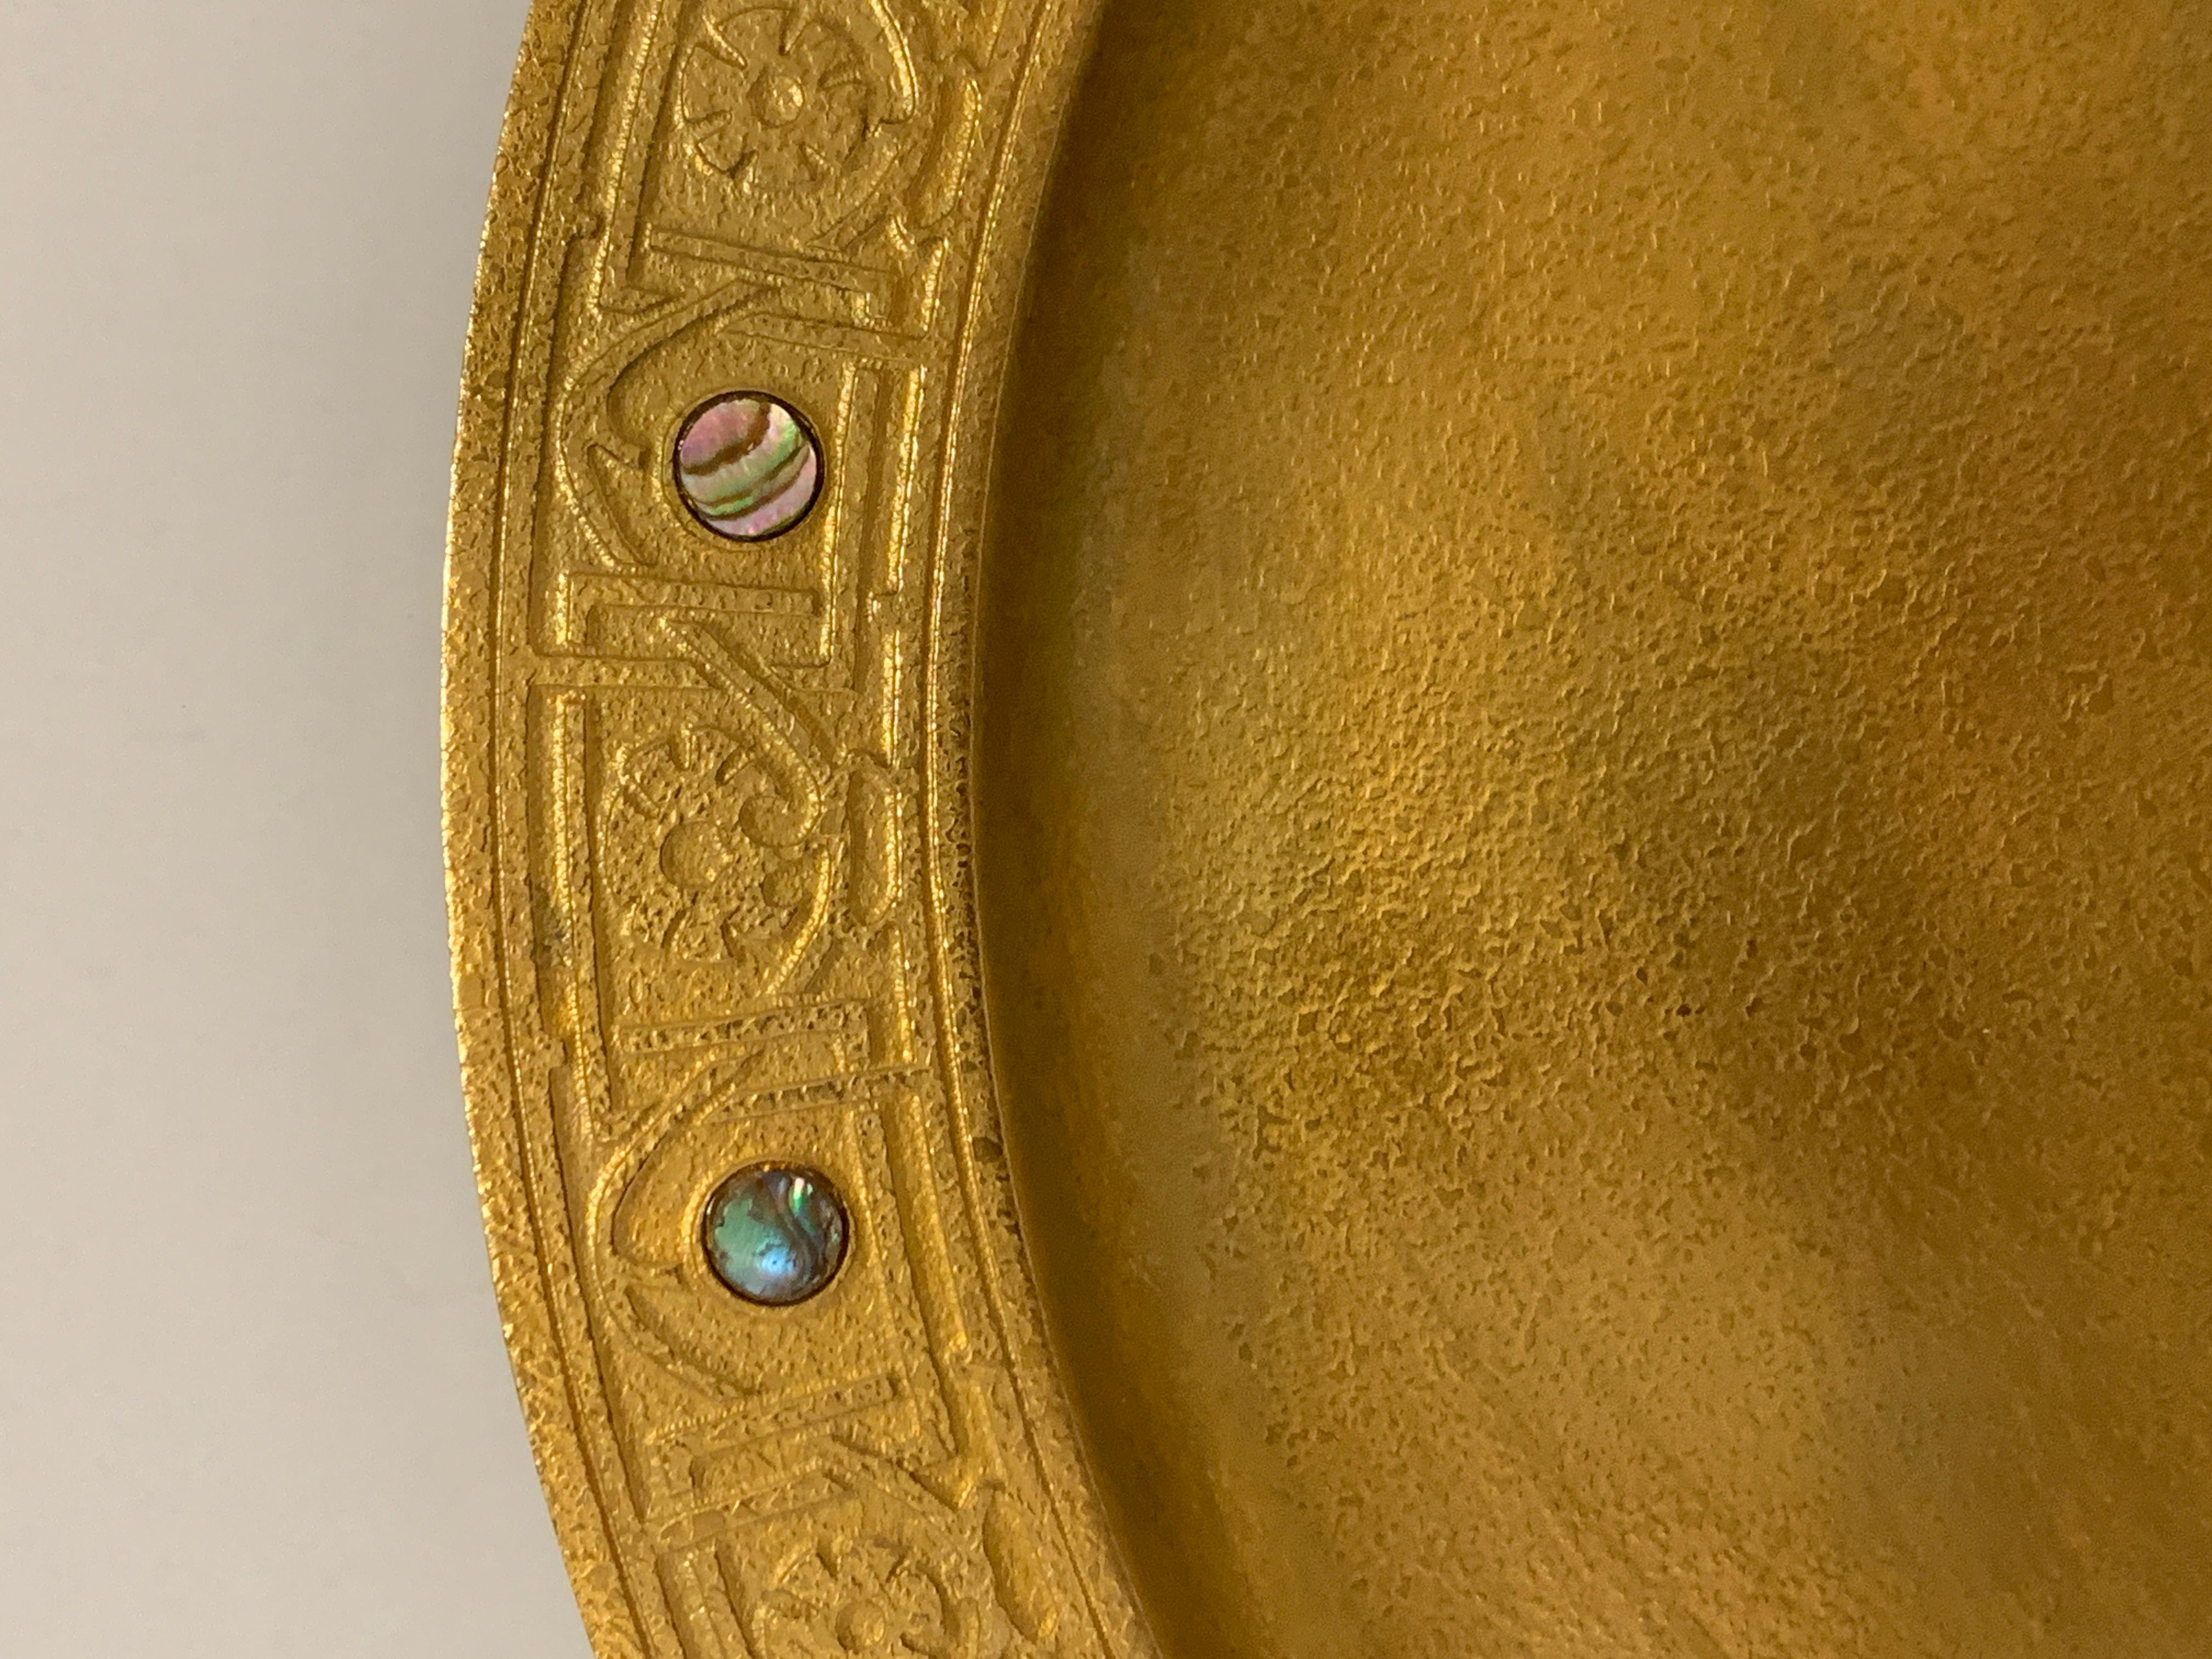 A signed Tiffany Studios gilt doré bronze charger inlaid on the rim with abalone insets. Features a nice rim design as well. Marked on the base with the number 1730. It is approx 12 inches in diameter. Overall good age appropriate condition with